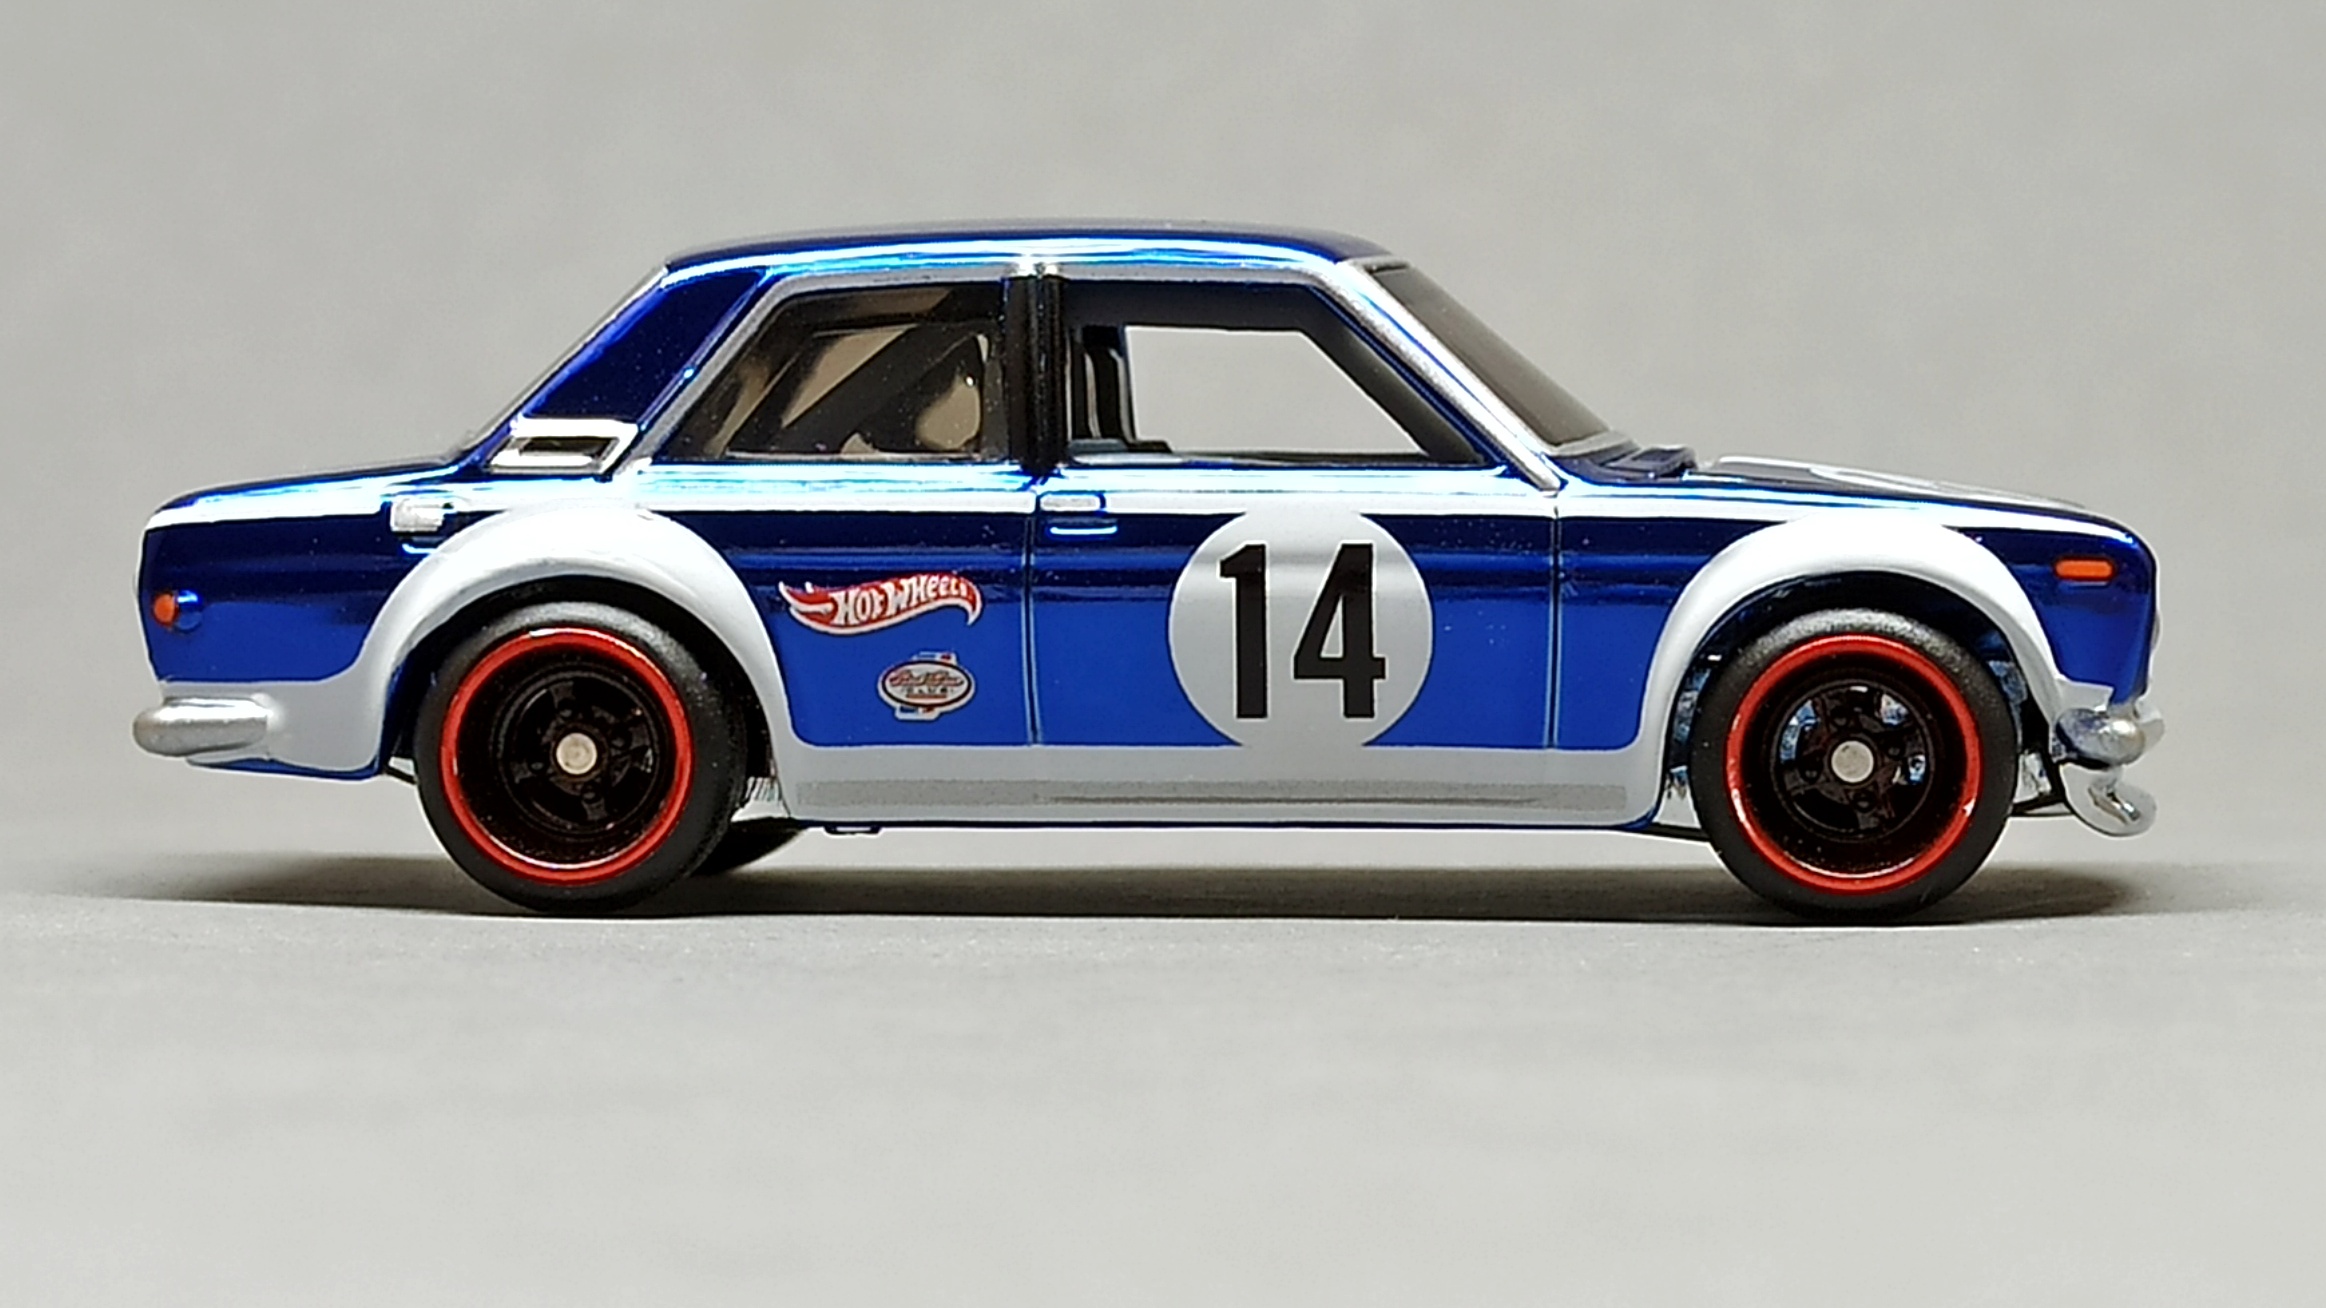 Hot Wheels Datsun Bluebird 510 (DTH31) 2016 RLC HWC Series 14 Real Riders (3/4) (1 of 7.000) spectraflame blue side angle